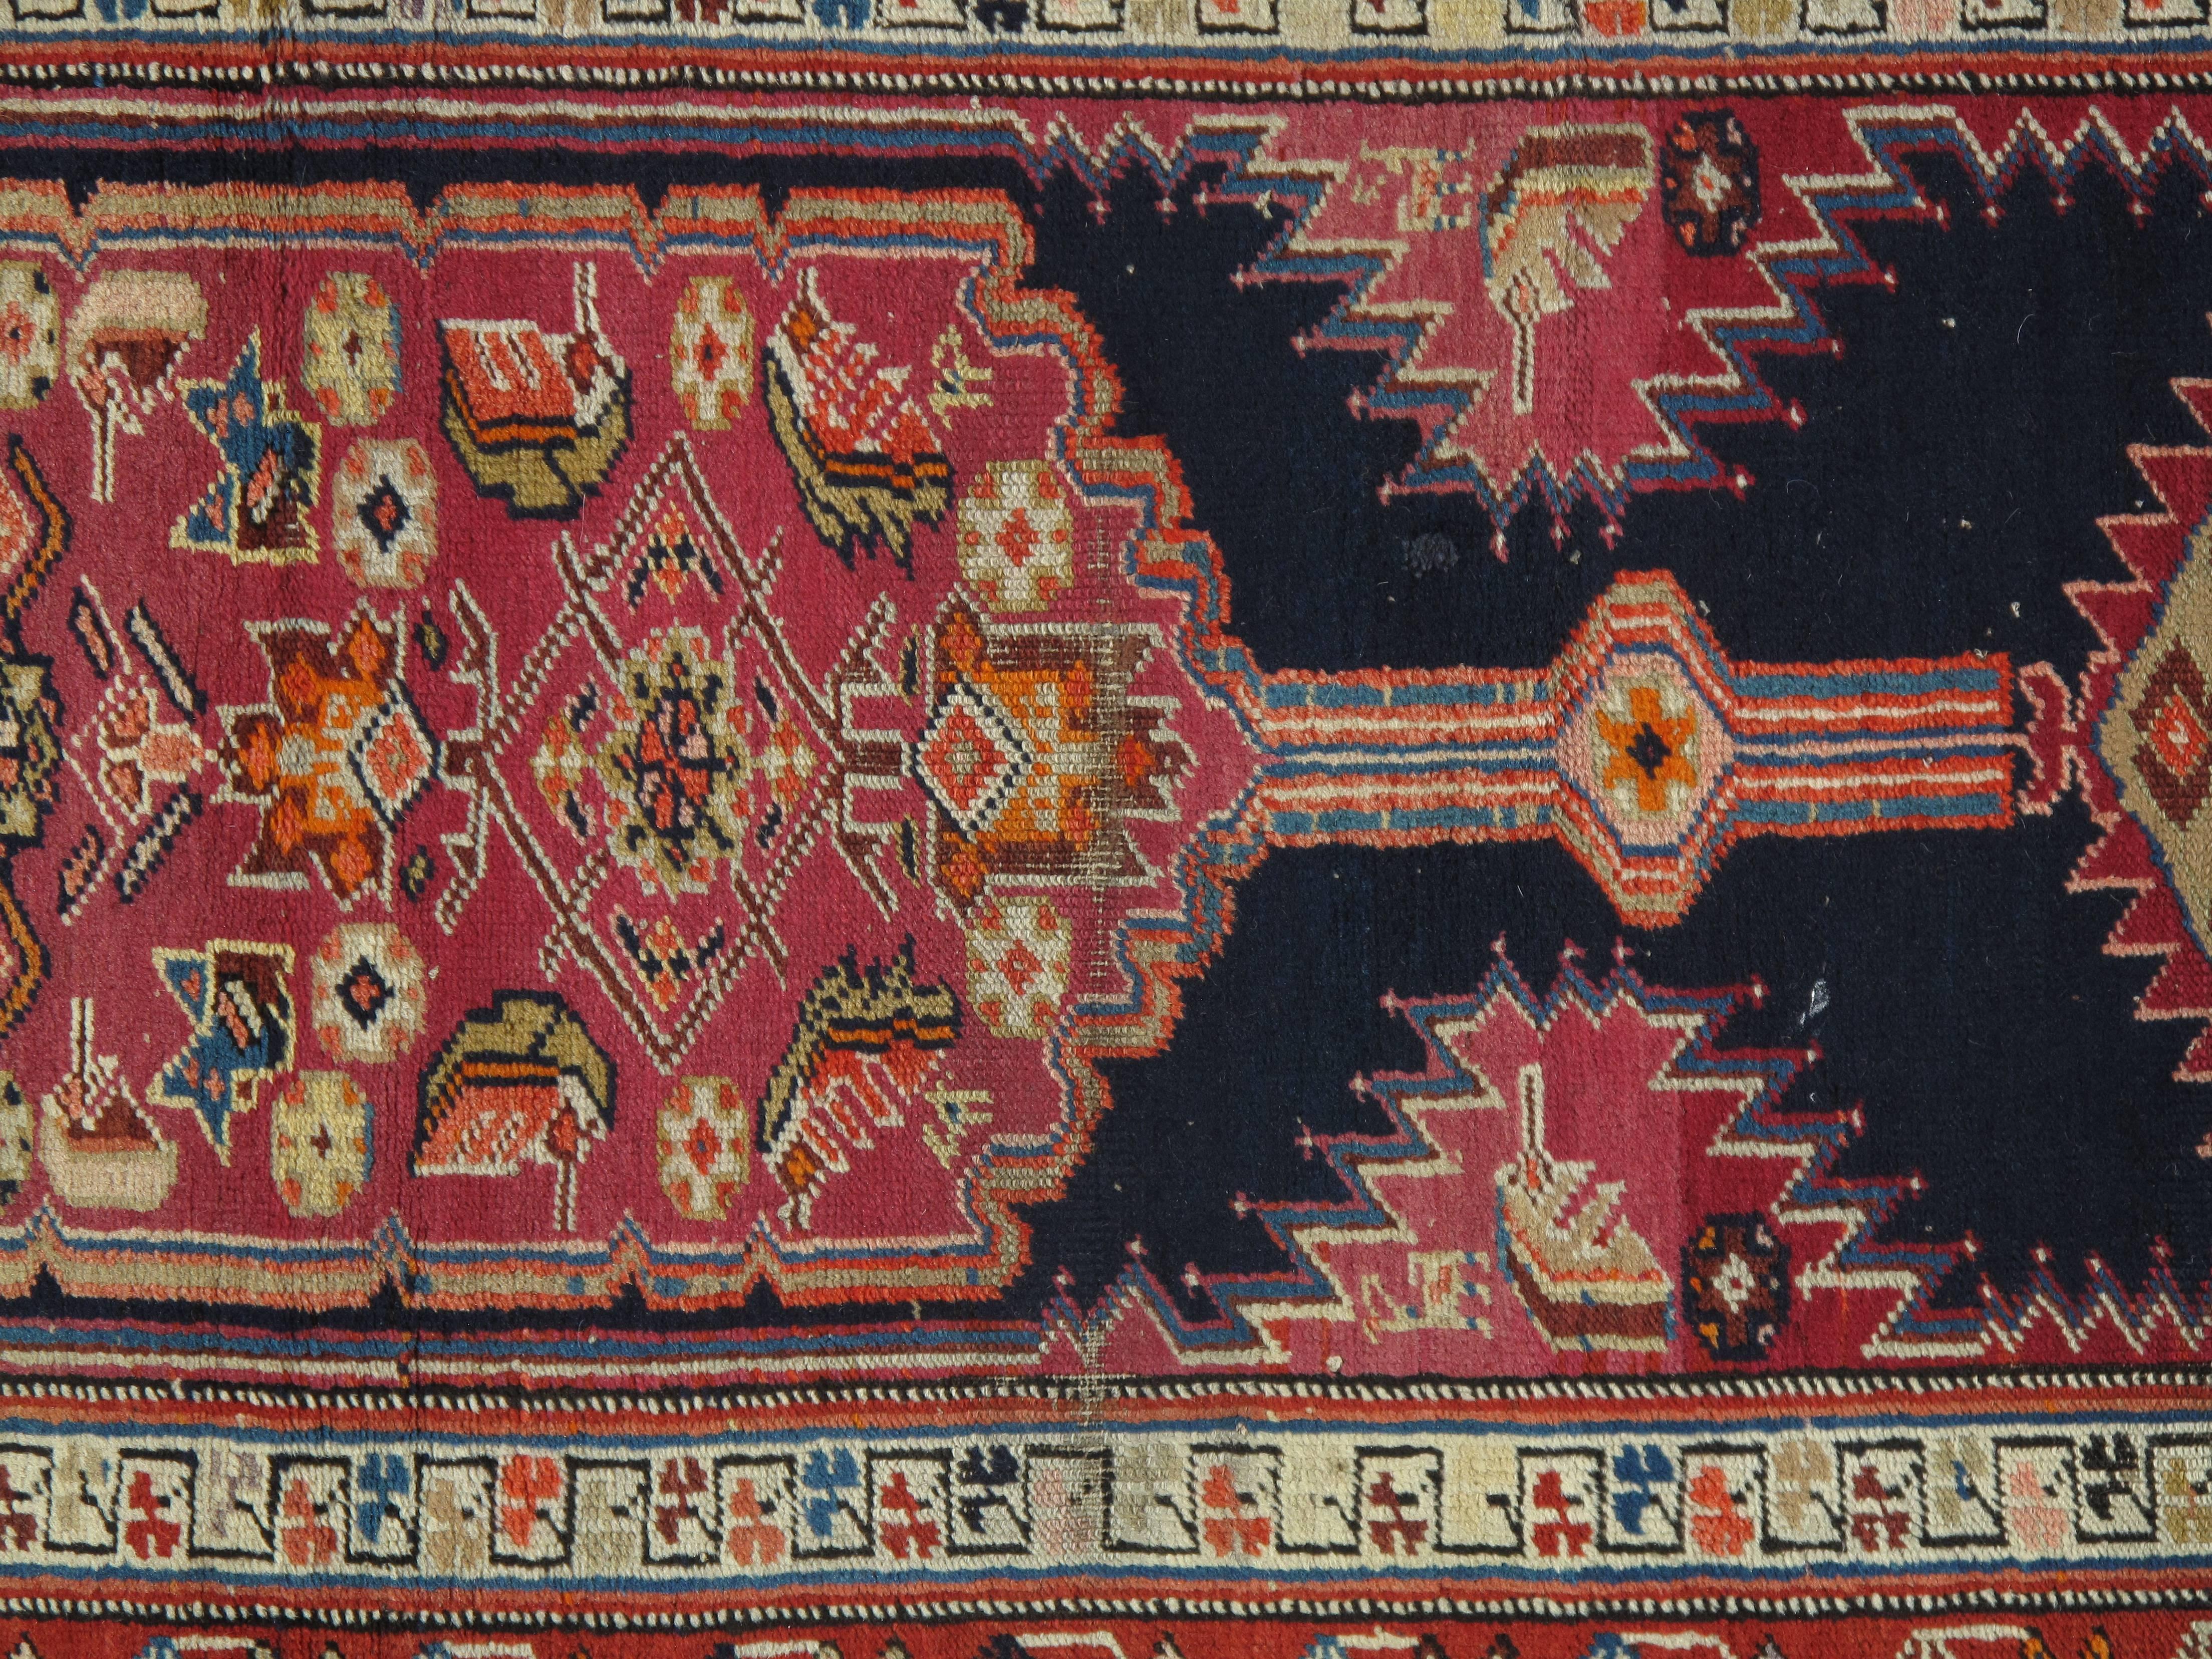 The Village of Serab is known for their fine long runners with a characteristic camel ground and lozenge-shaped medallions. These rugs are woven in the village of Serab, located in the North West Region of Persia.
Measures: 3' x 15'.